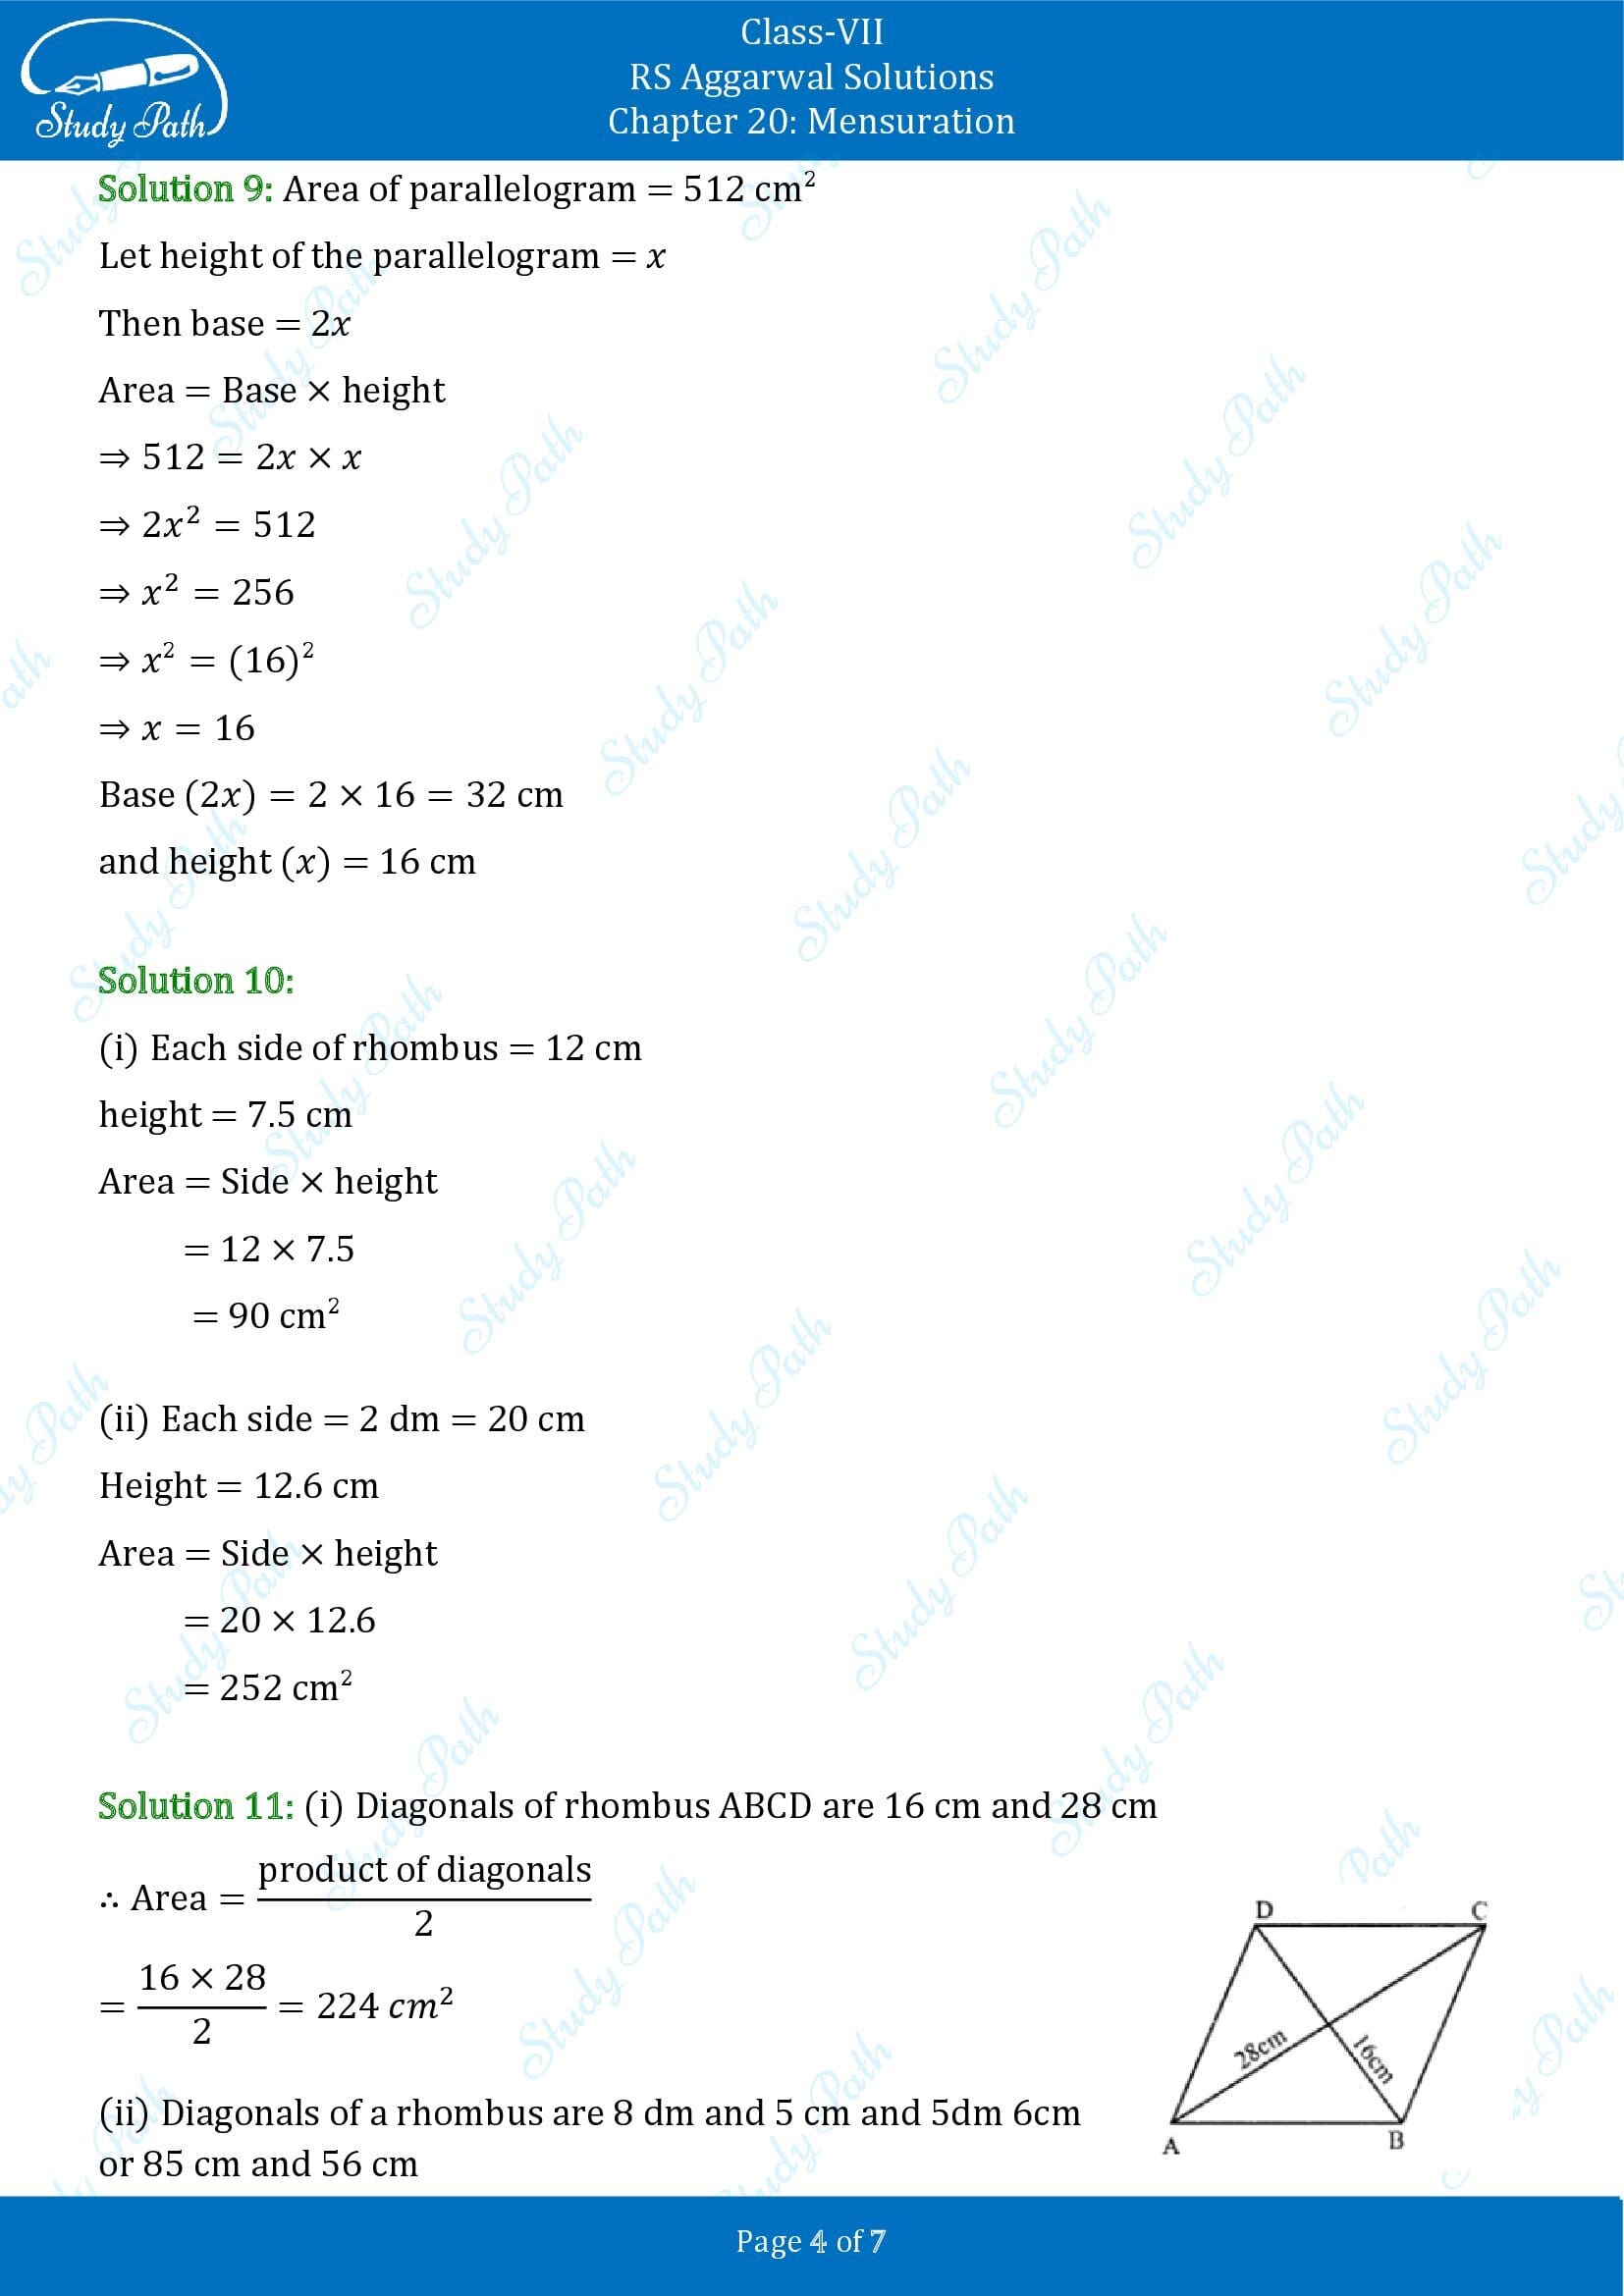 RS Aggarwal Solutions Class 7 Chapter 20 Mensuration Exercise 20C 00004